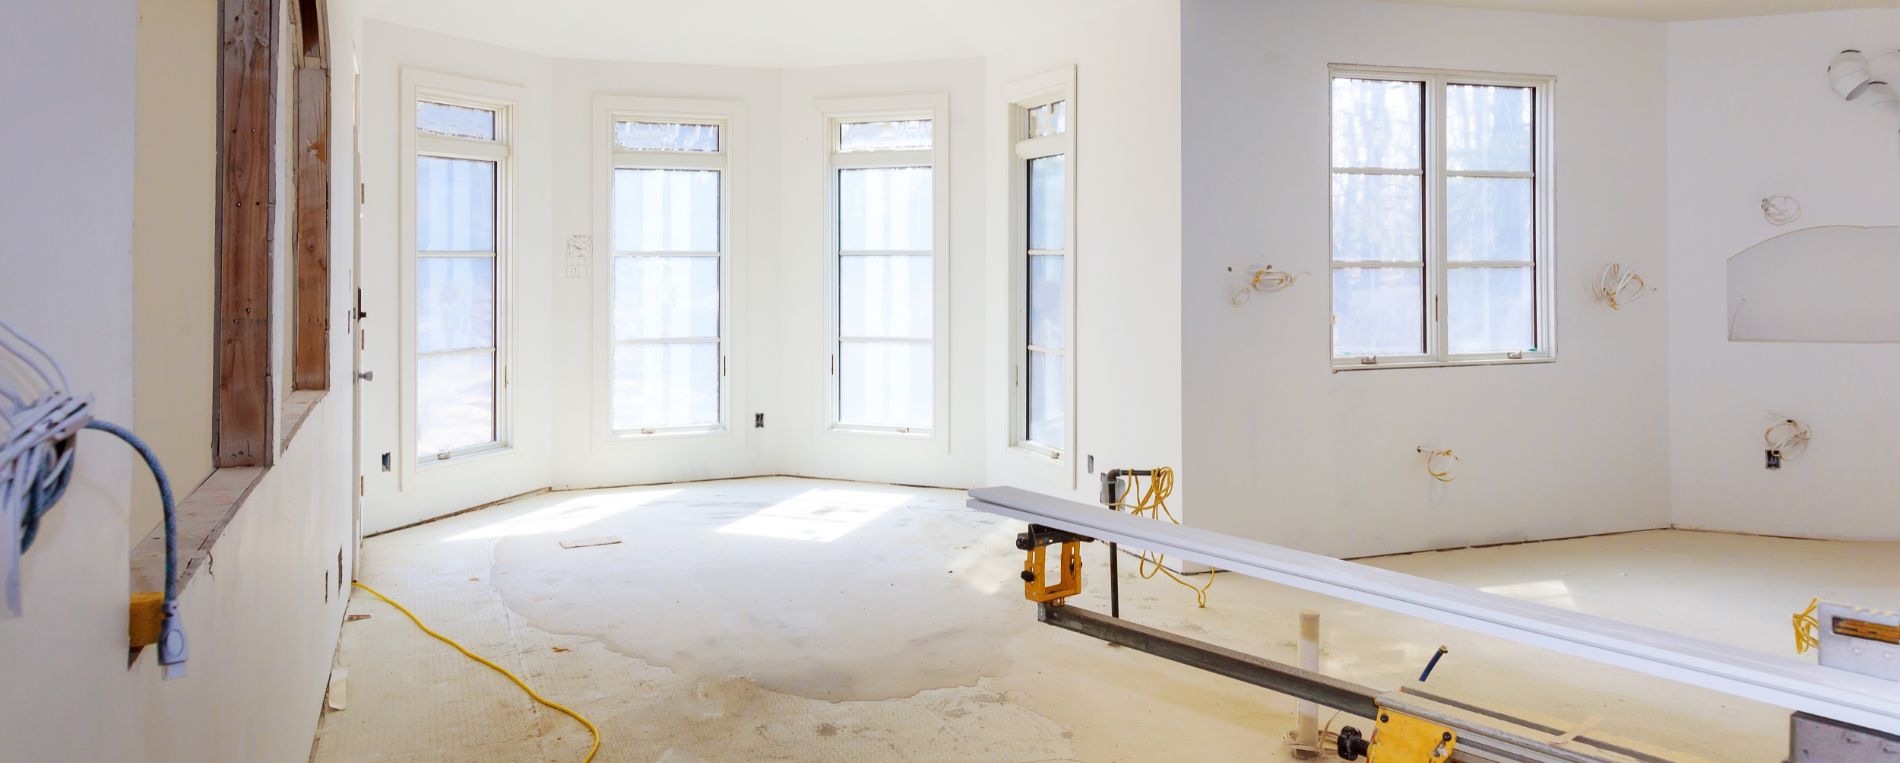 Our Drywall Repair Services